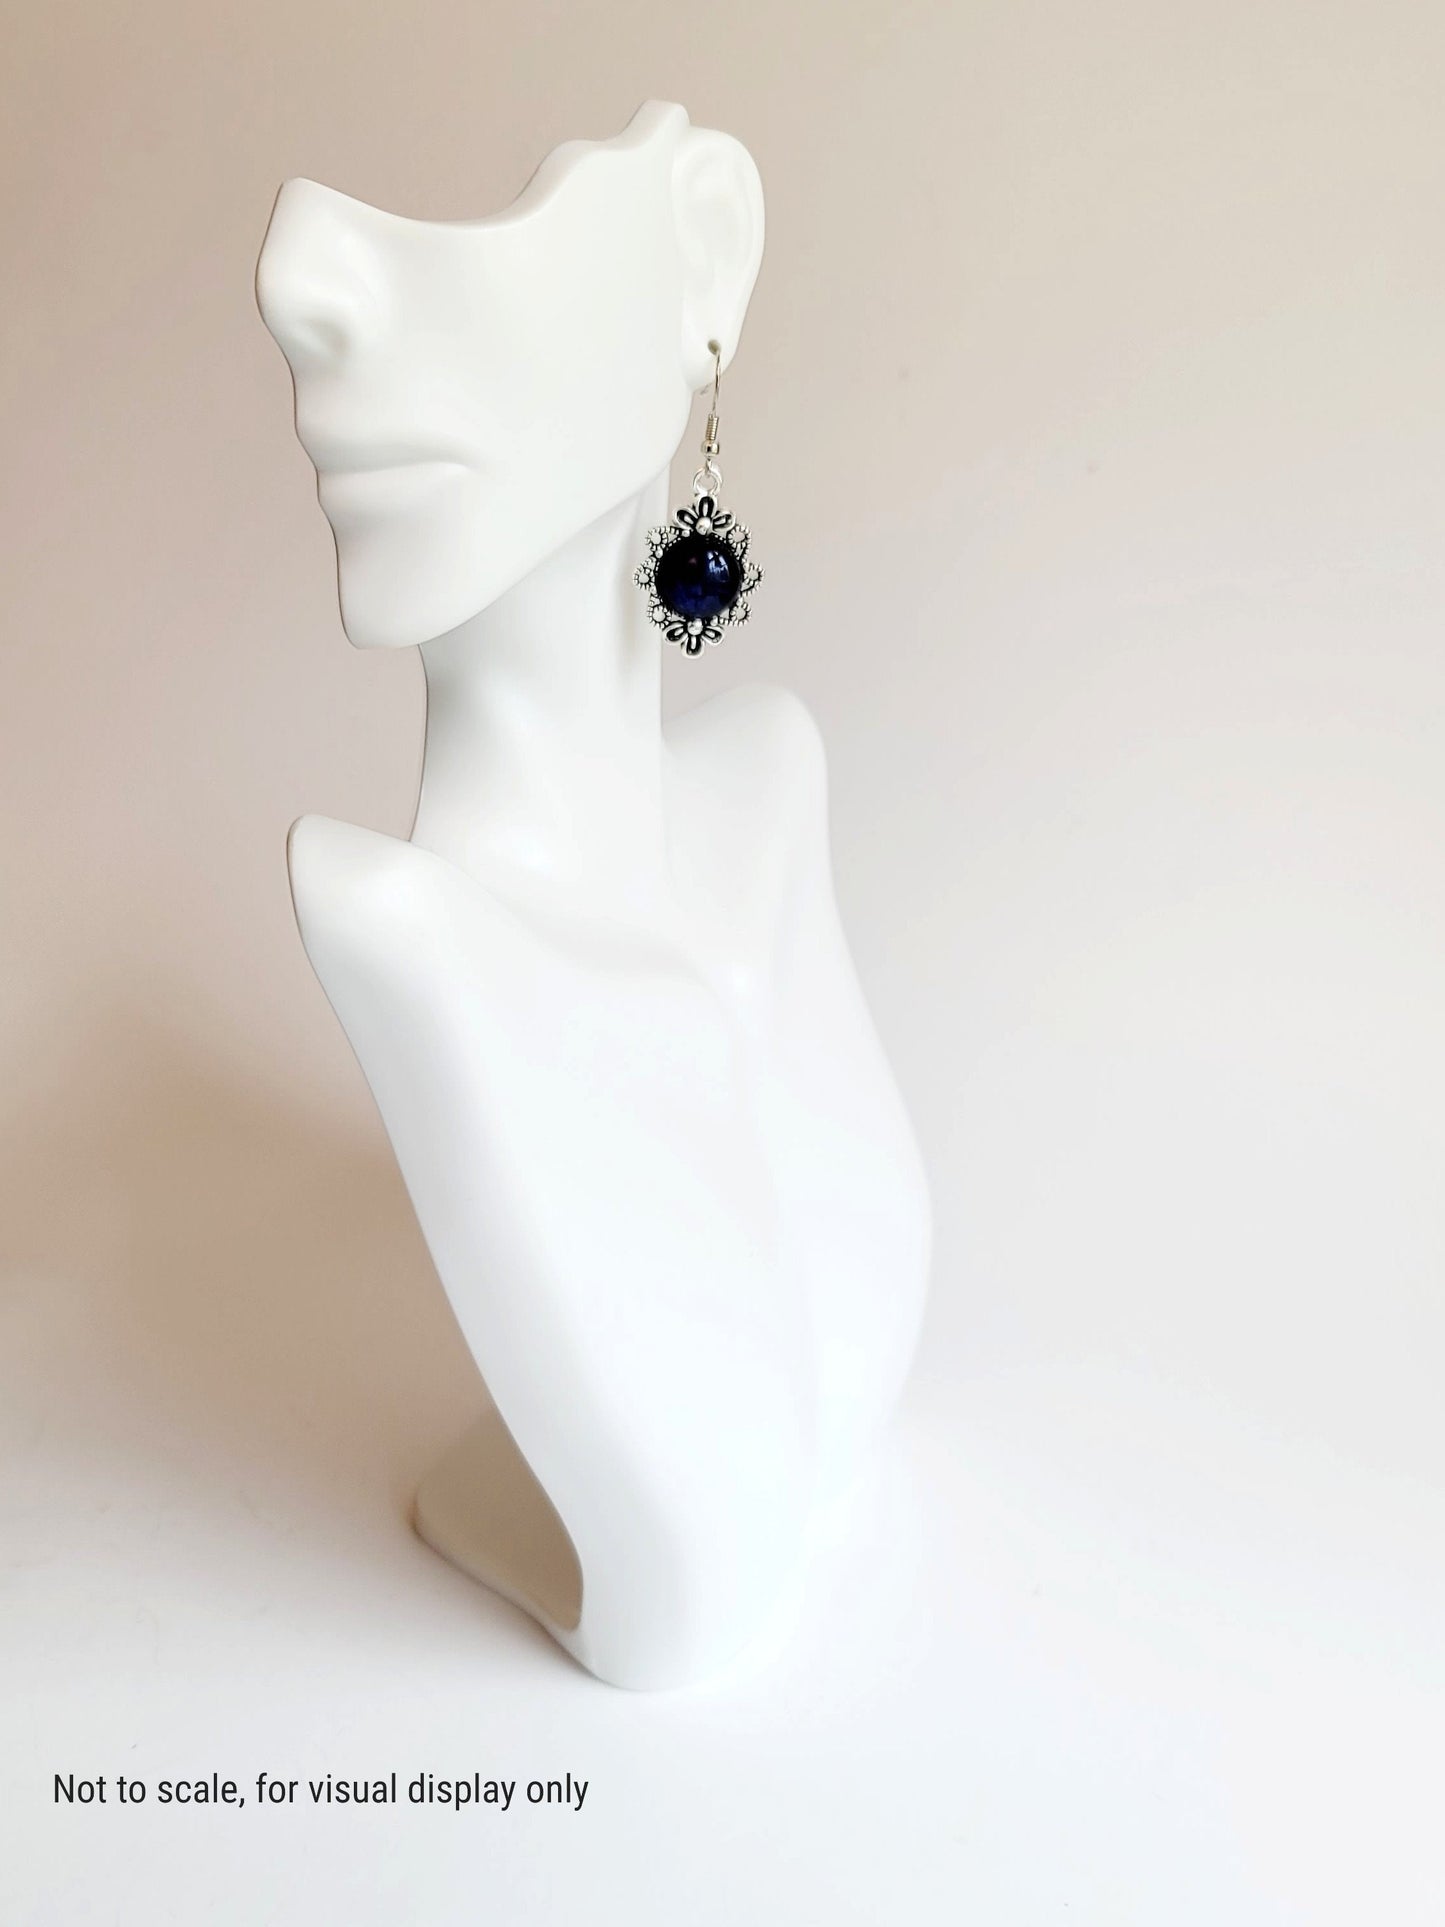 Silver tone flower earrings with  dichroic dark blue fused glass  cabo pierced style